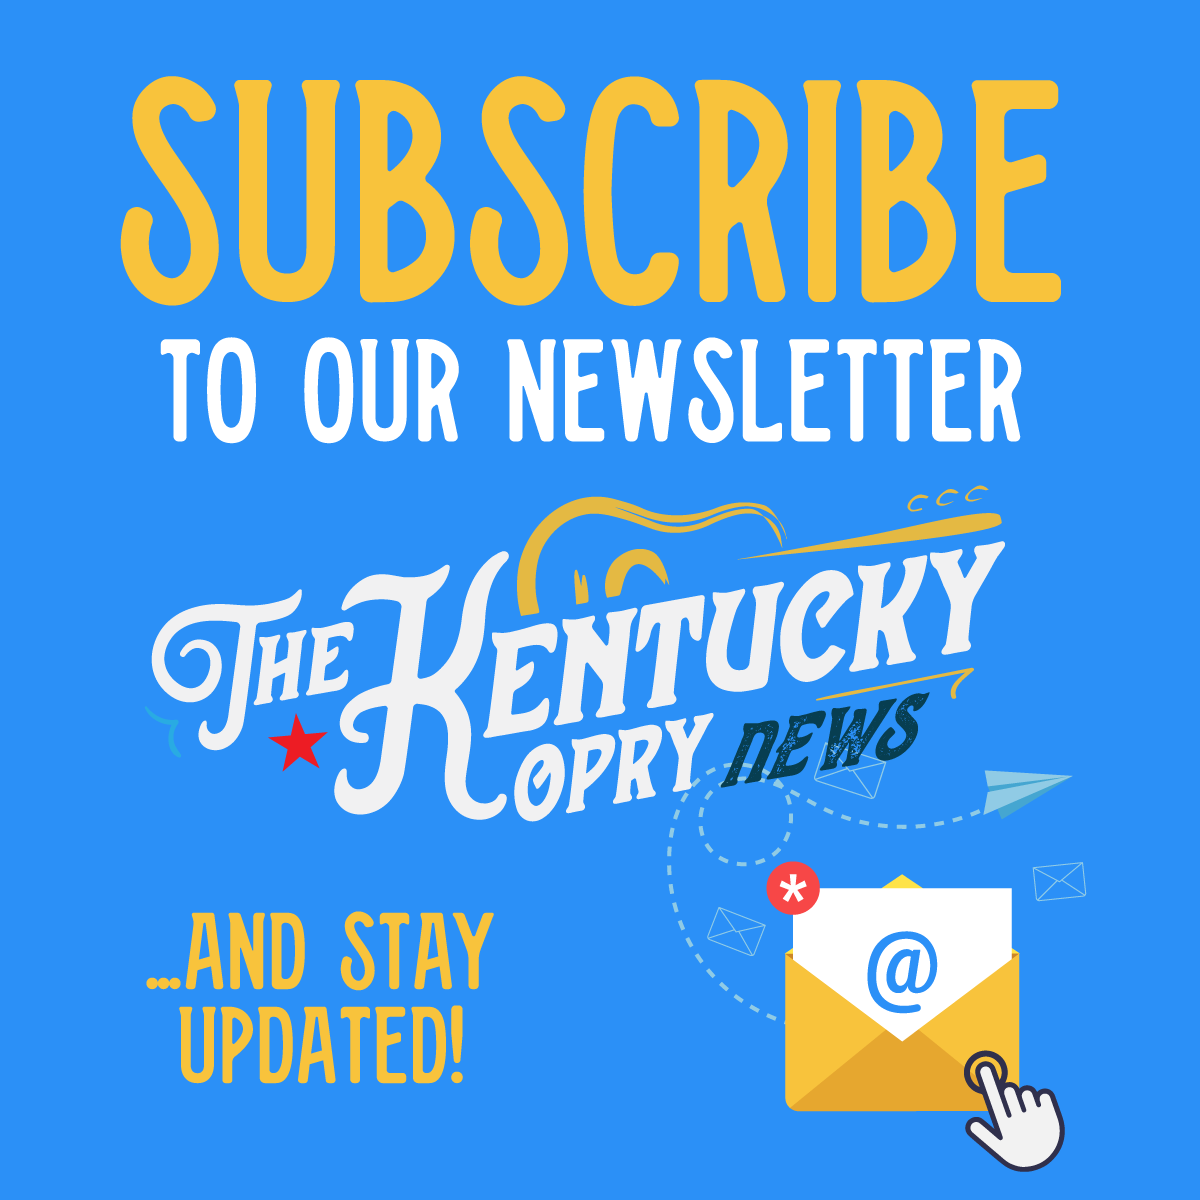 Subscribe to Kentucky Opry News